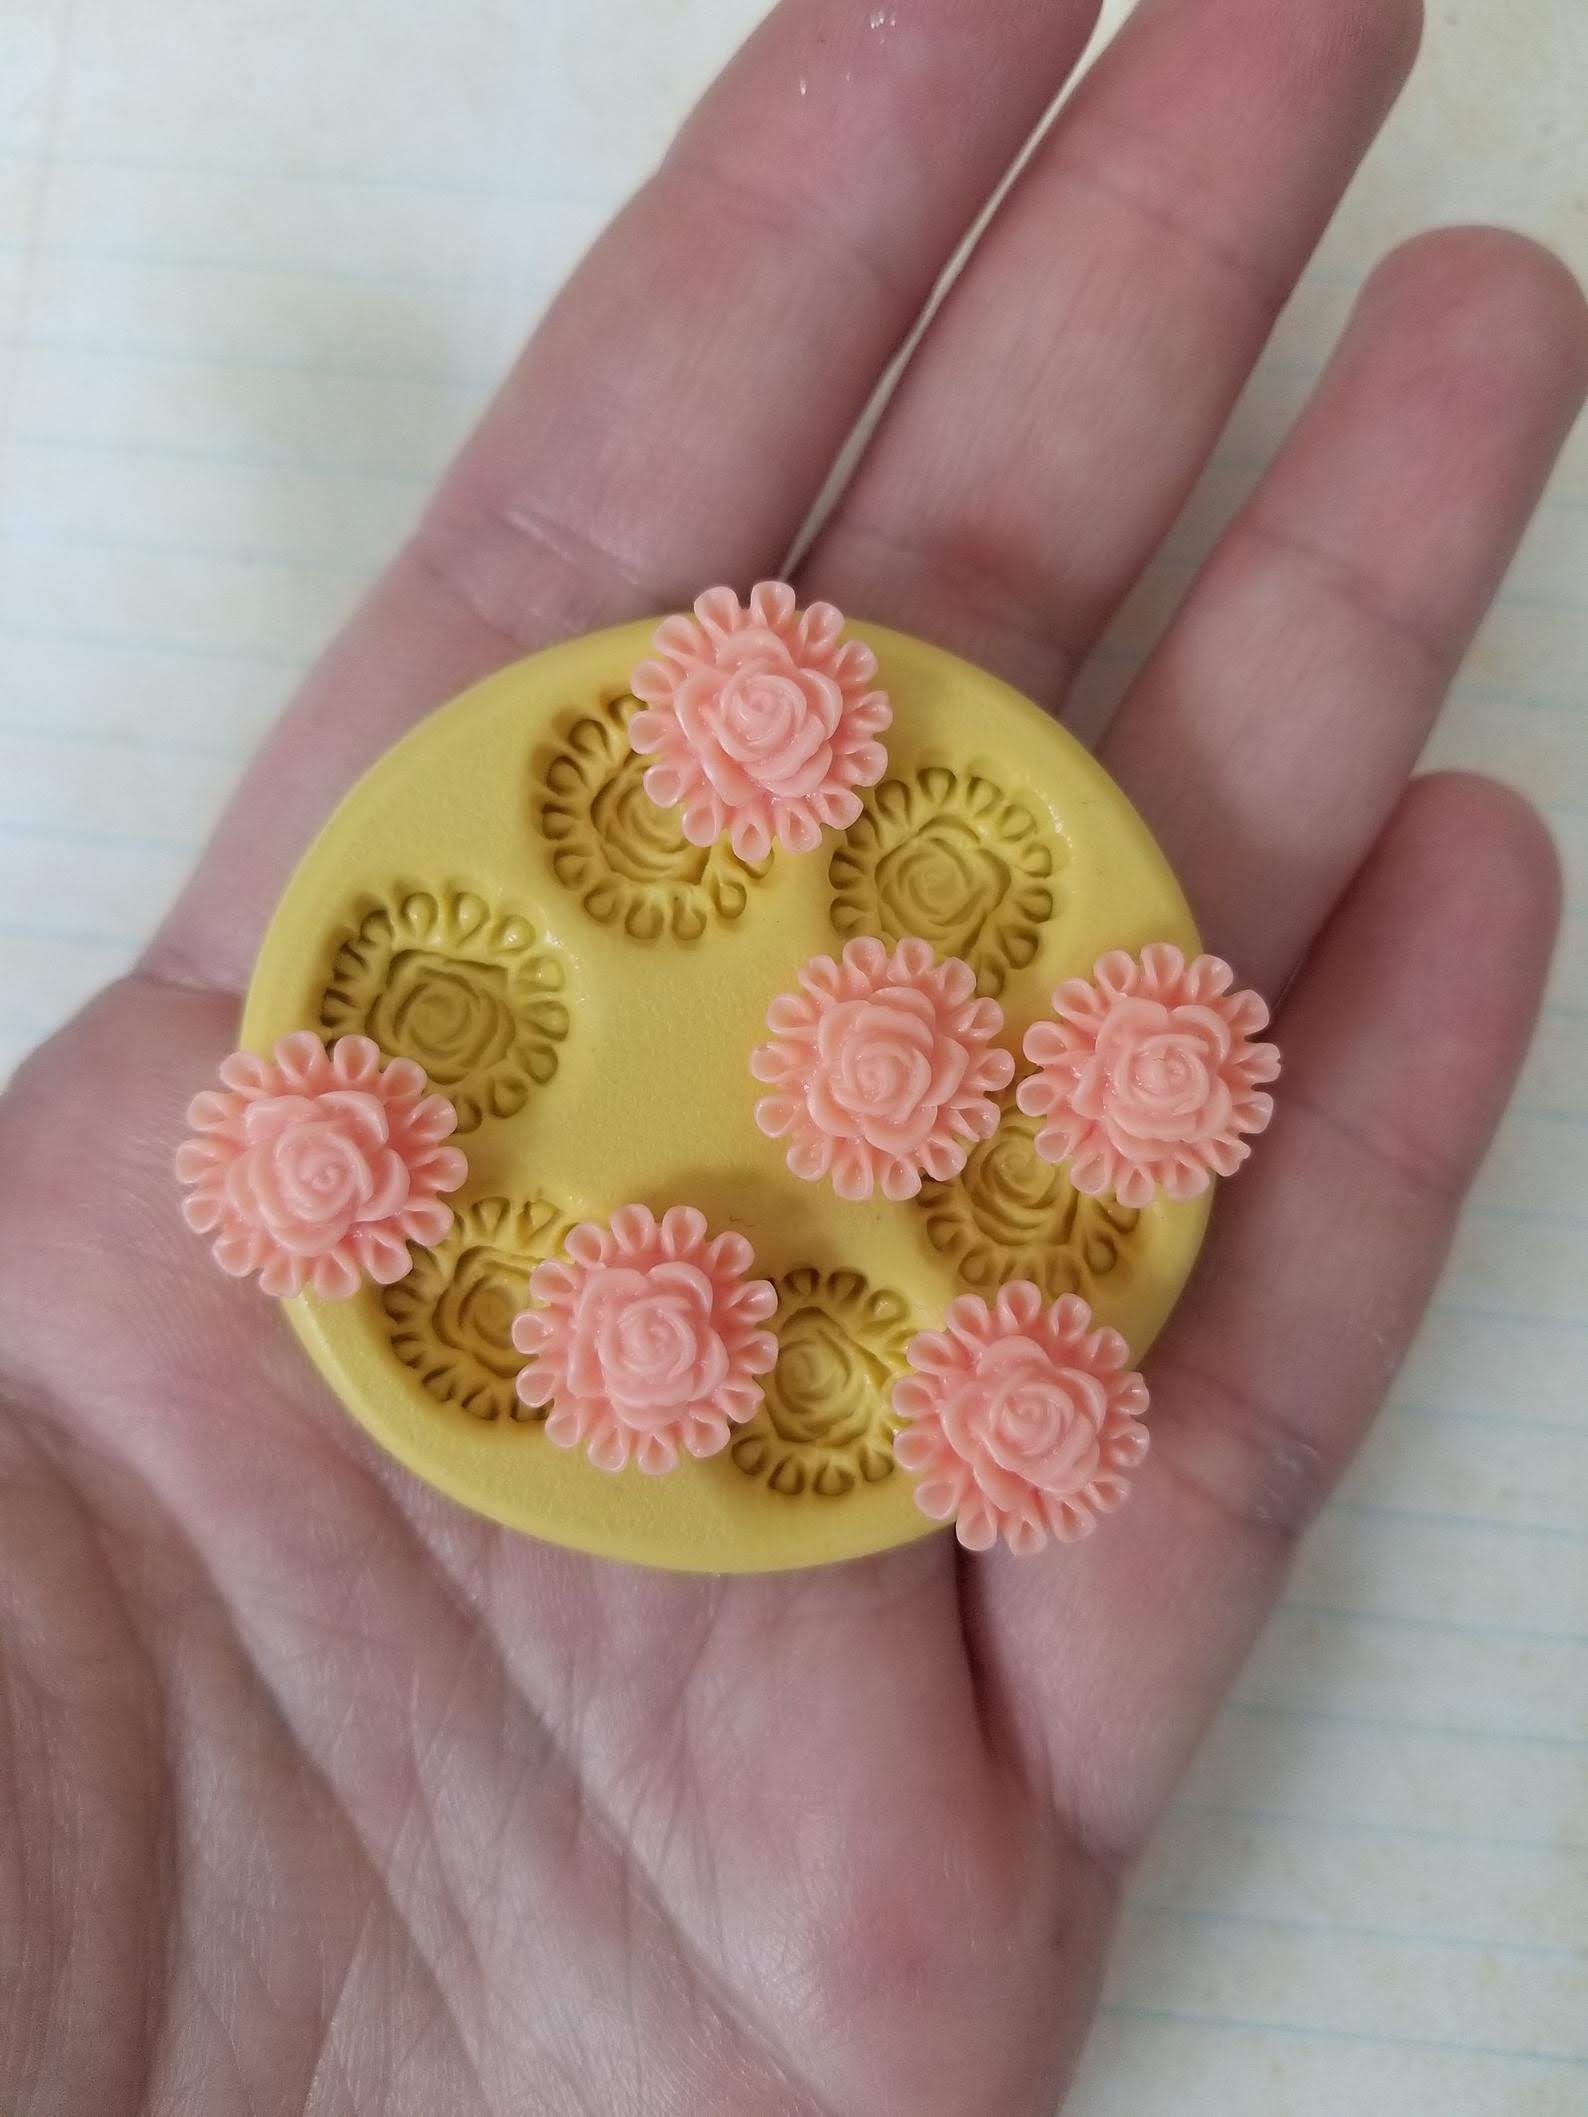 Mini Flowers Silicone Mold Rose Mold for Chocolate Mold for